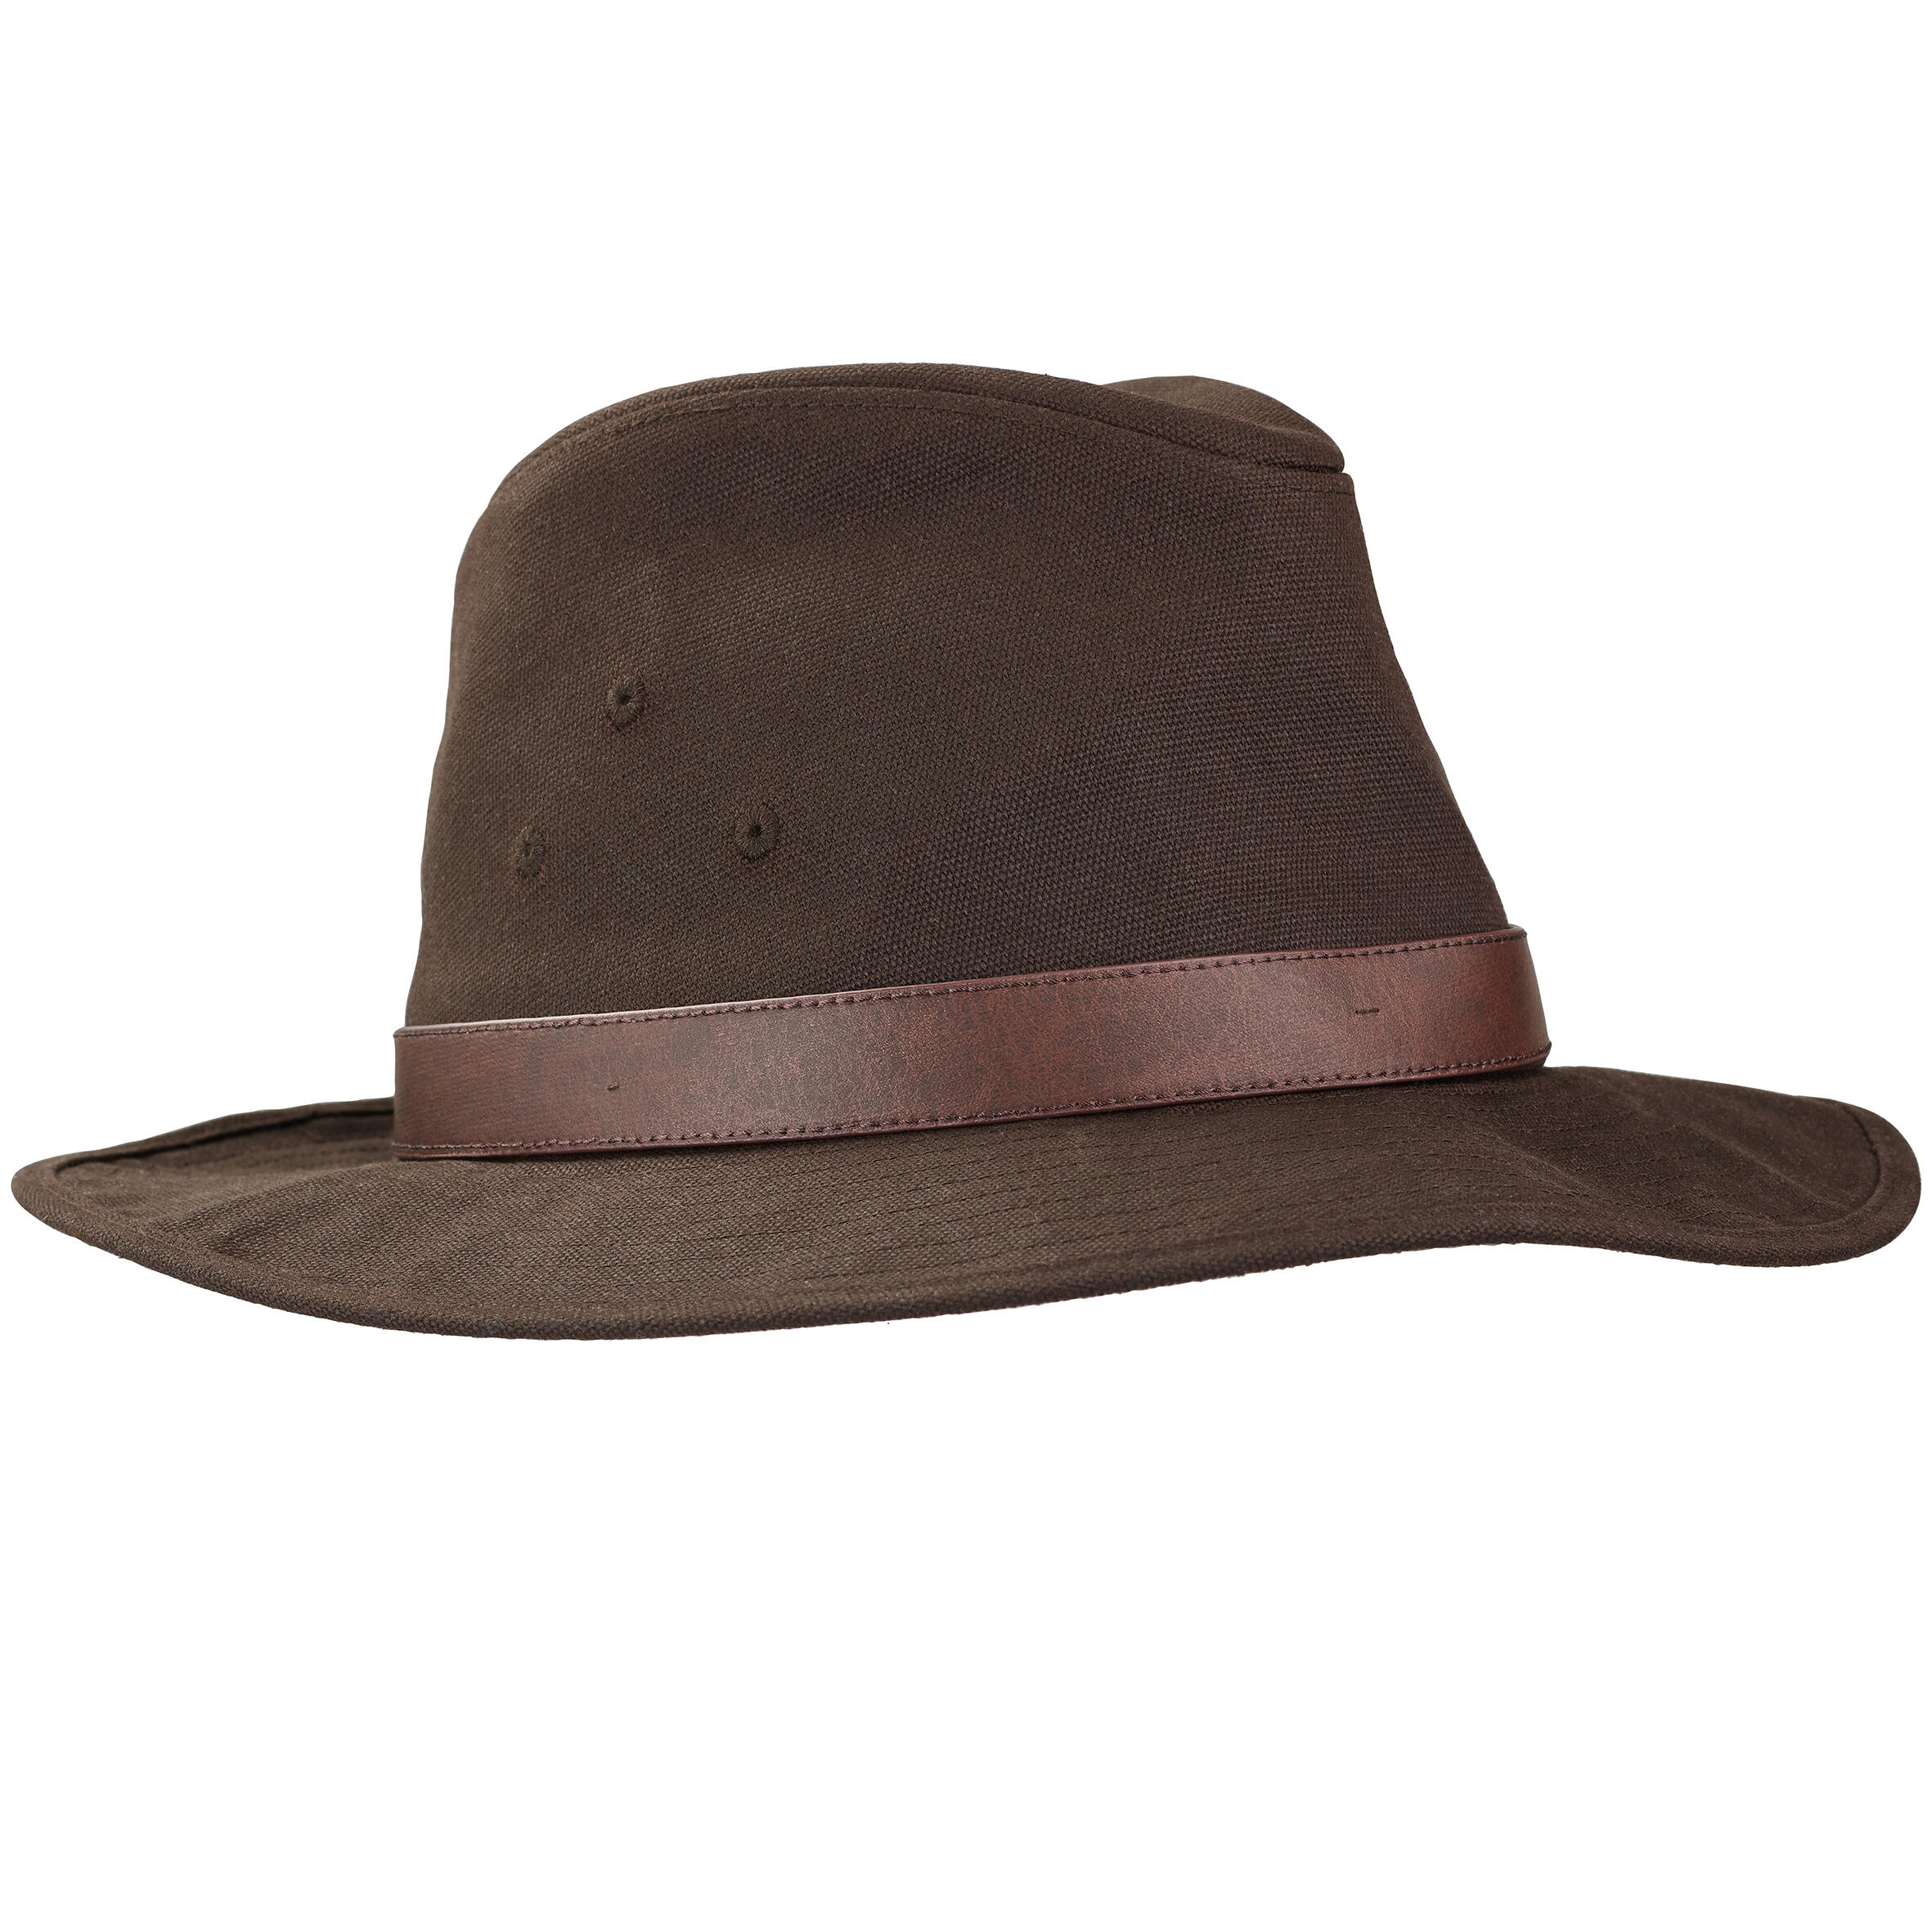 Hunting hat 540, durable and water-repellent 1/7